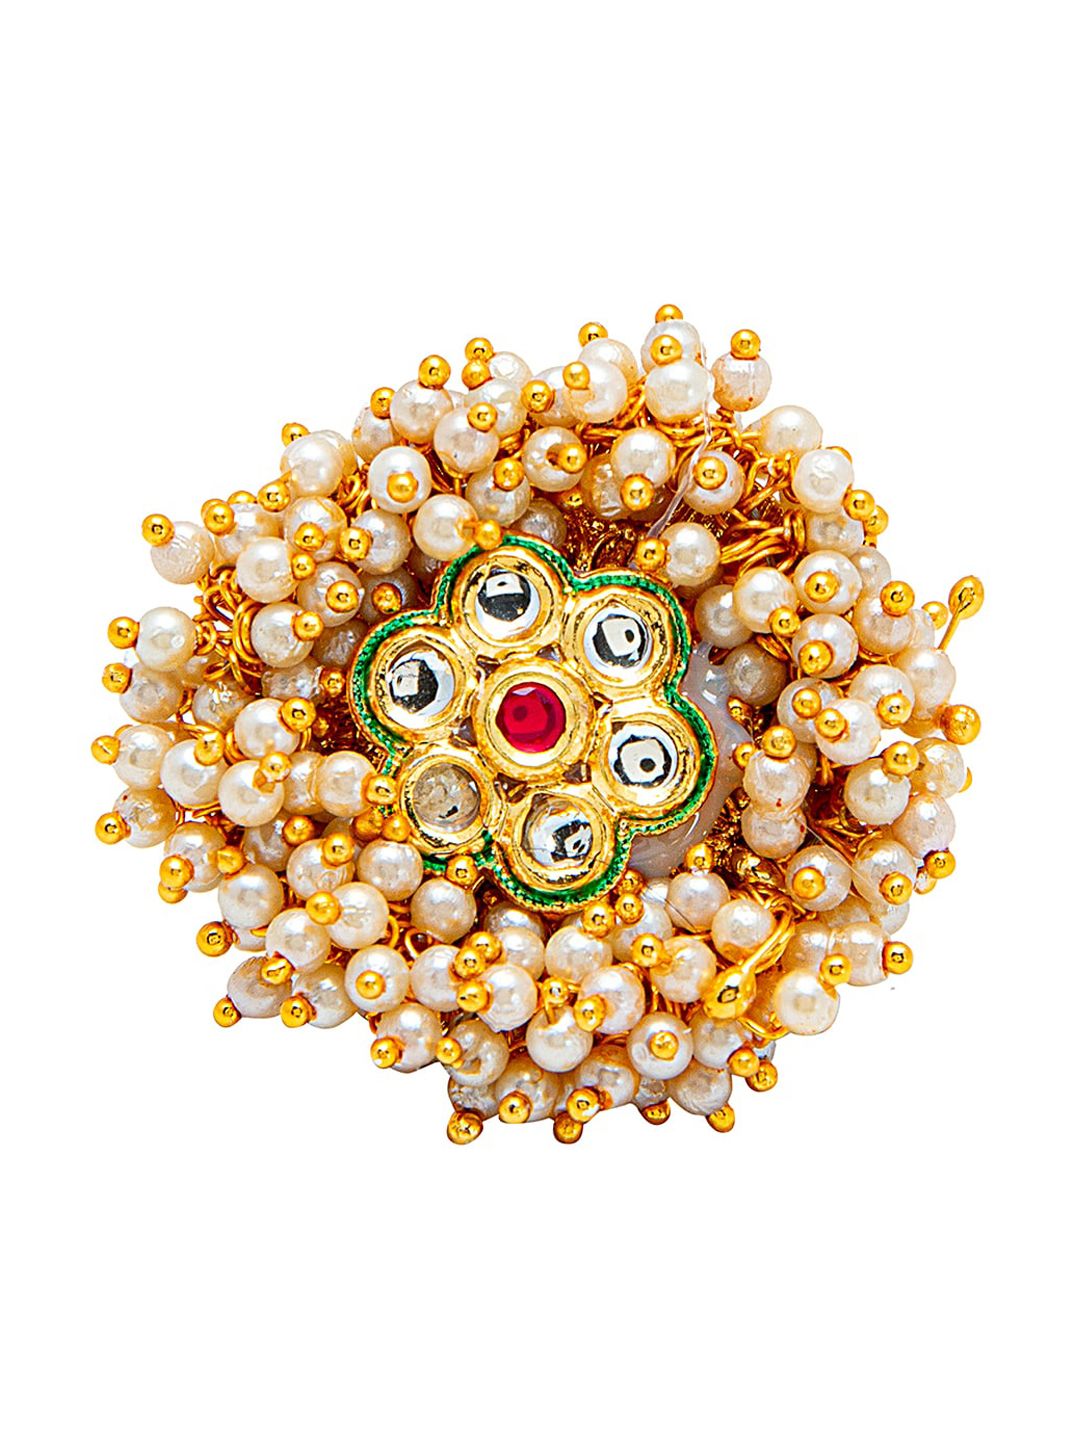 Shining Jewel - By Shivansh Gold-Plated Pearl Clustered Finger Ring Price in India